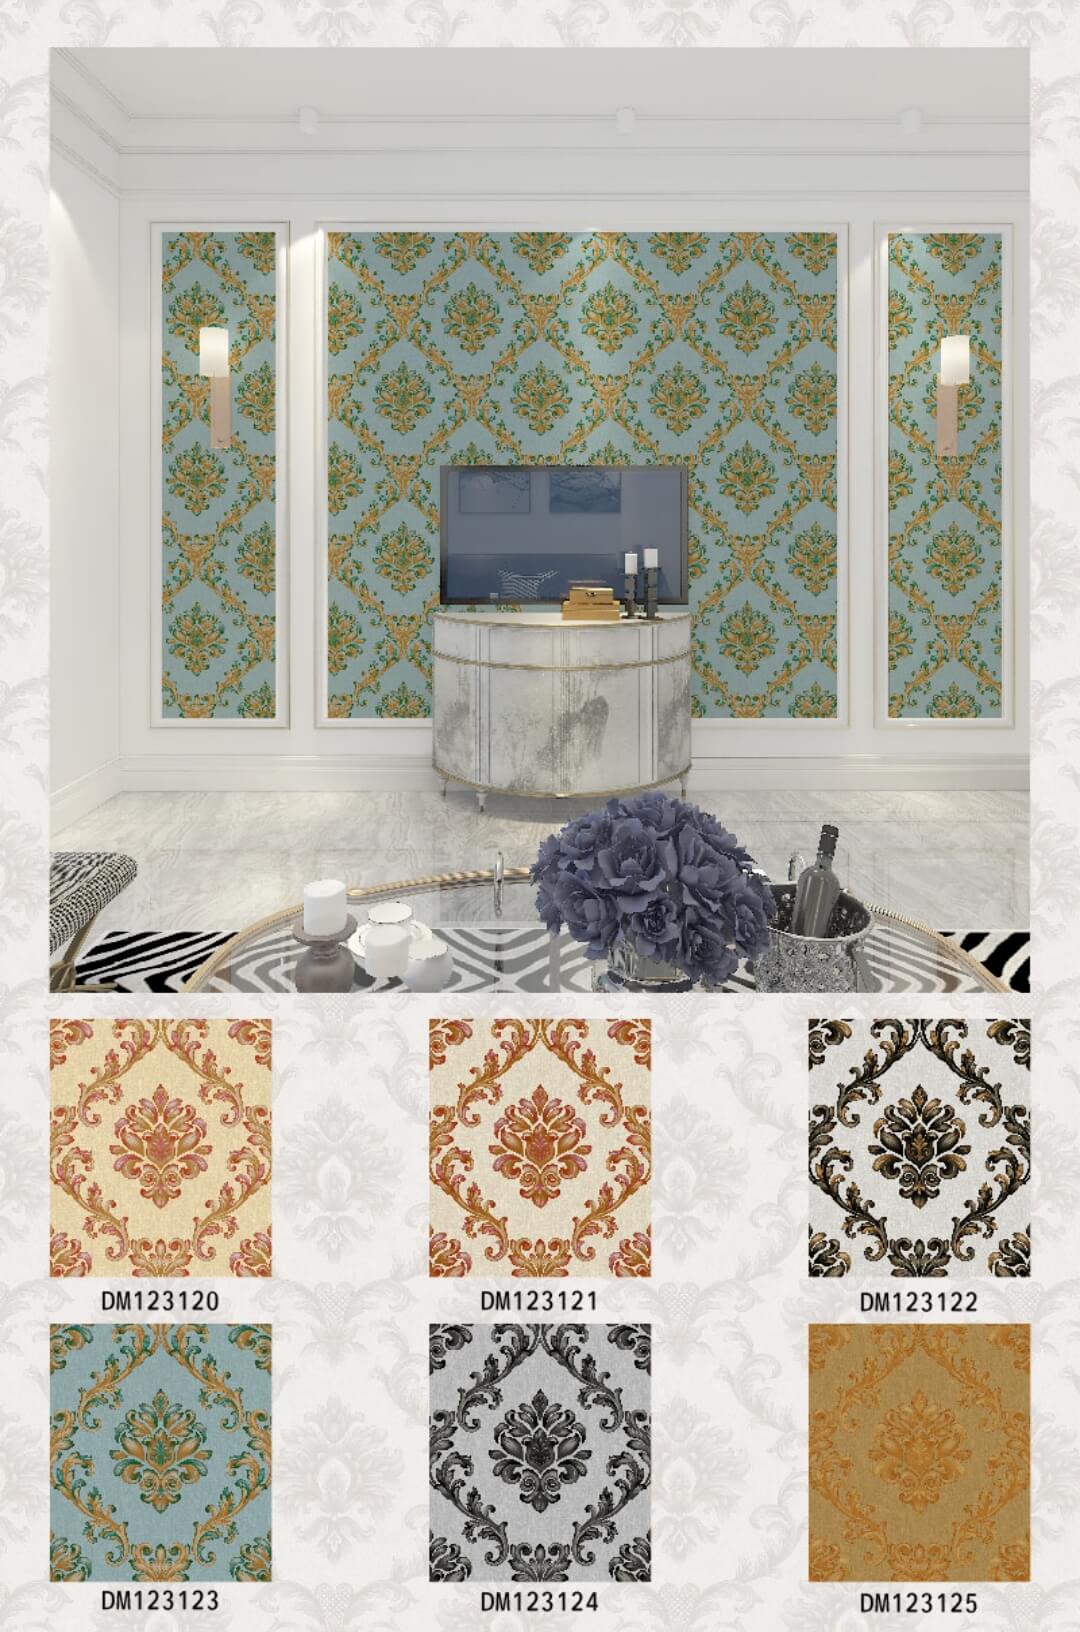 Classic Damask Pvc Wallpaper From China Wholesale (16)